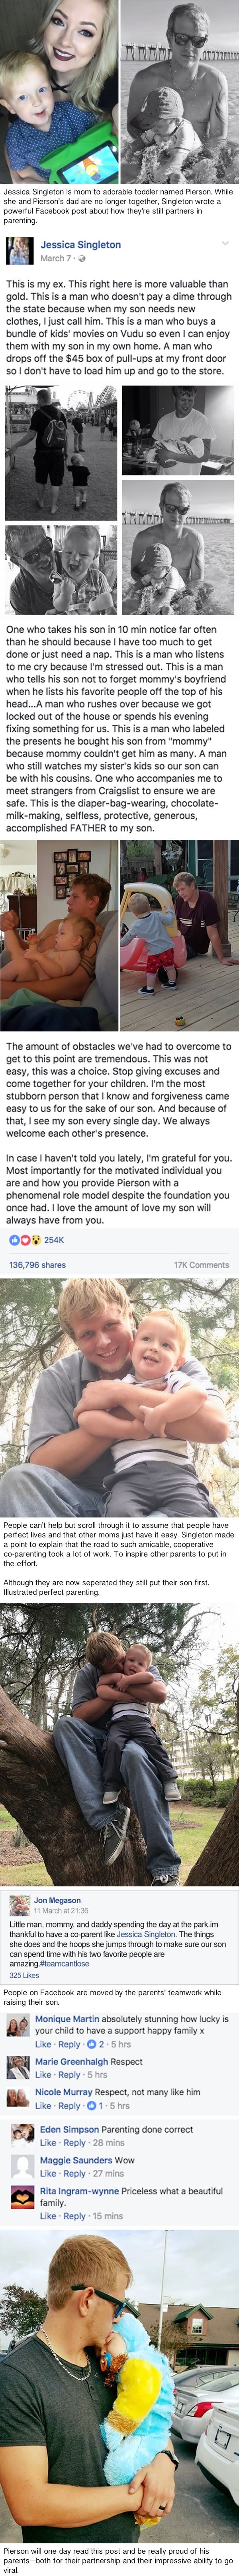 Mother's post goes viral with tribute to her ex